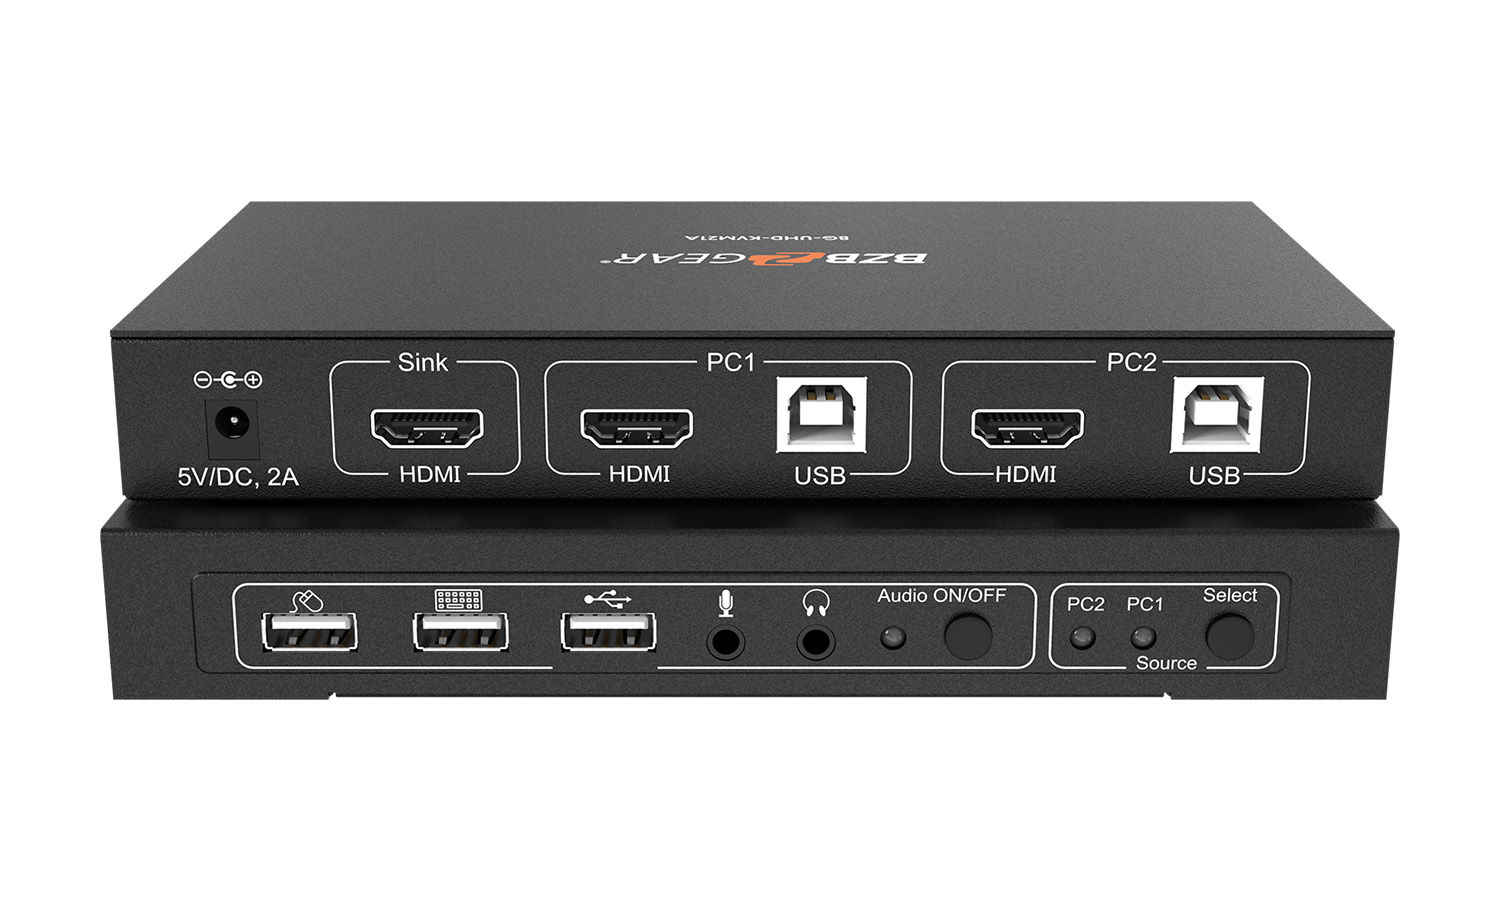 BG-UHD-KVM21A 2X1 KVM Switcher with USB2.0 Ports for Peripherals and 3.5mm Jacks for Audio Support by BZBGEAR